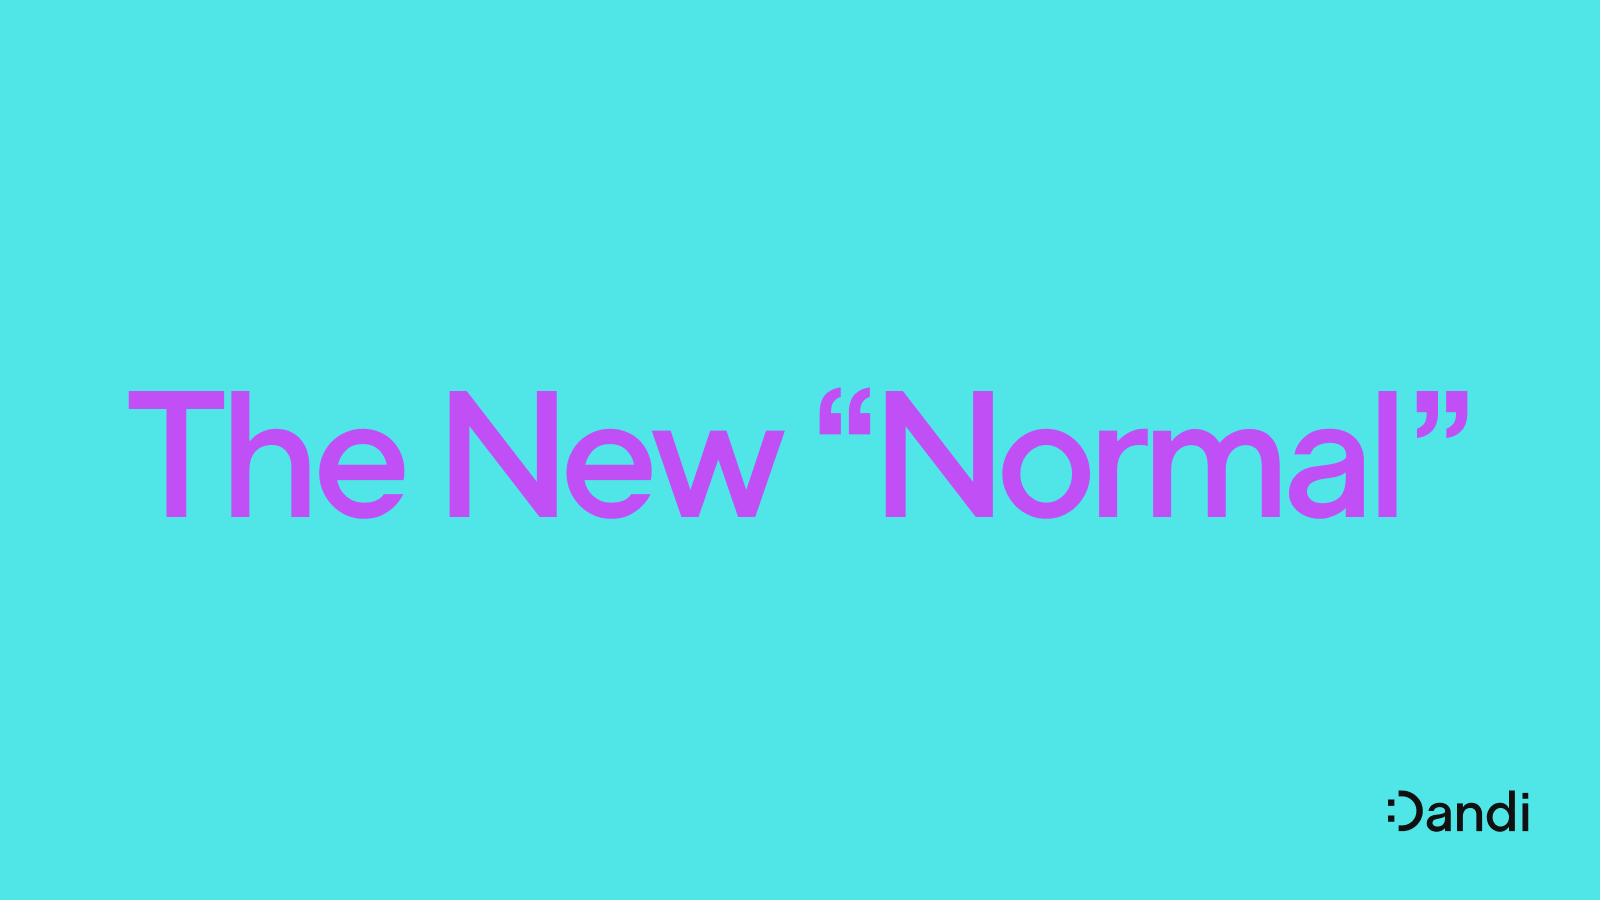 A header image reading "The New Normal." The word normal is in quotation marks, suggesting that the current moment in DEI is anything but normal.